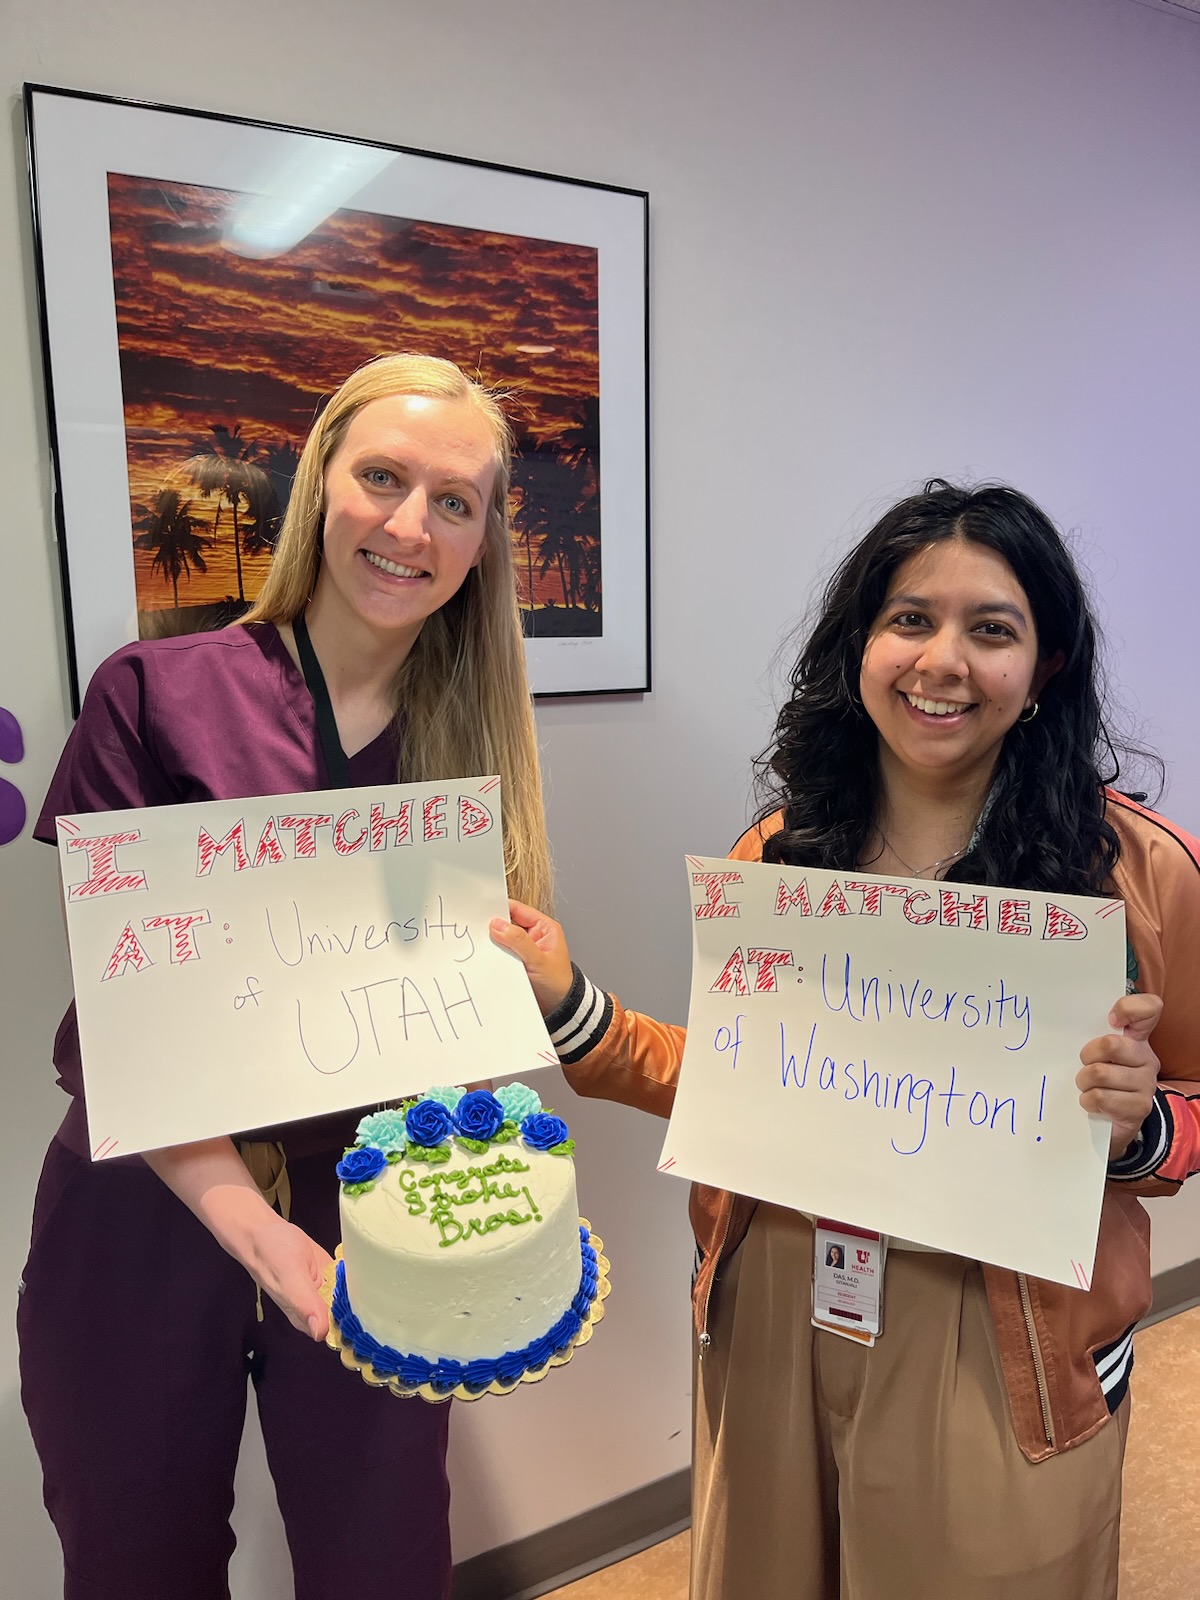 Two people holding matching day posters and a cake